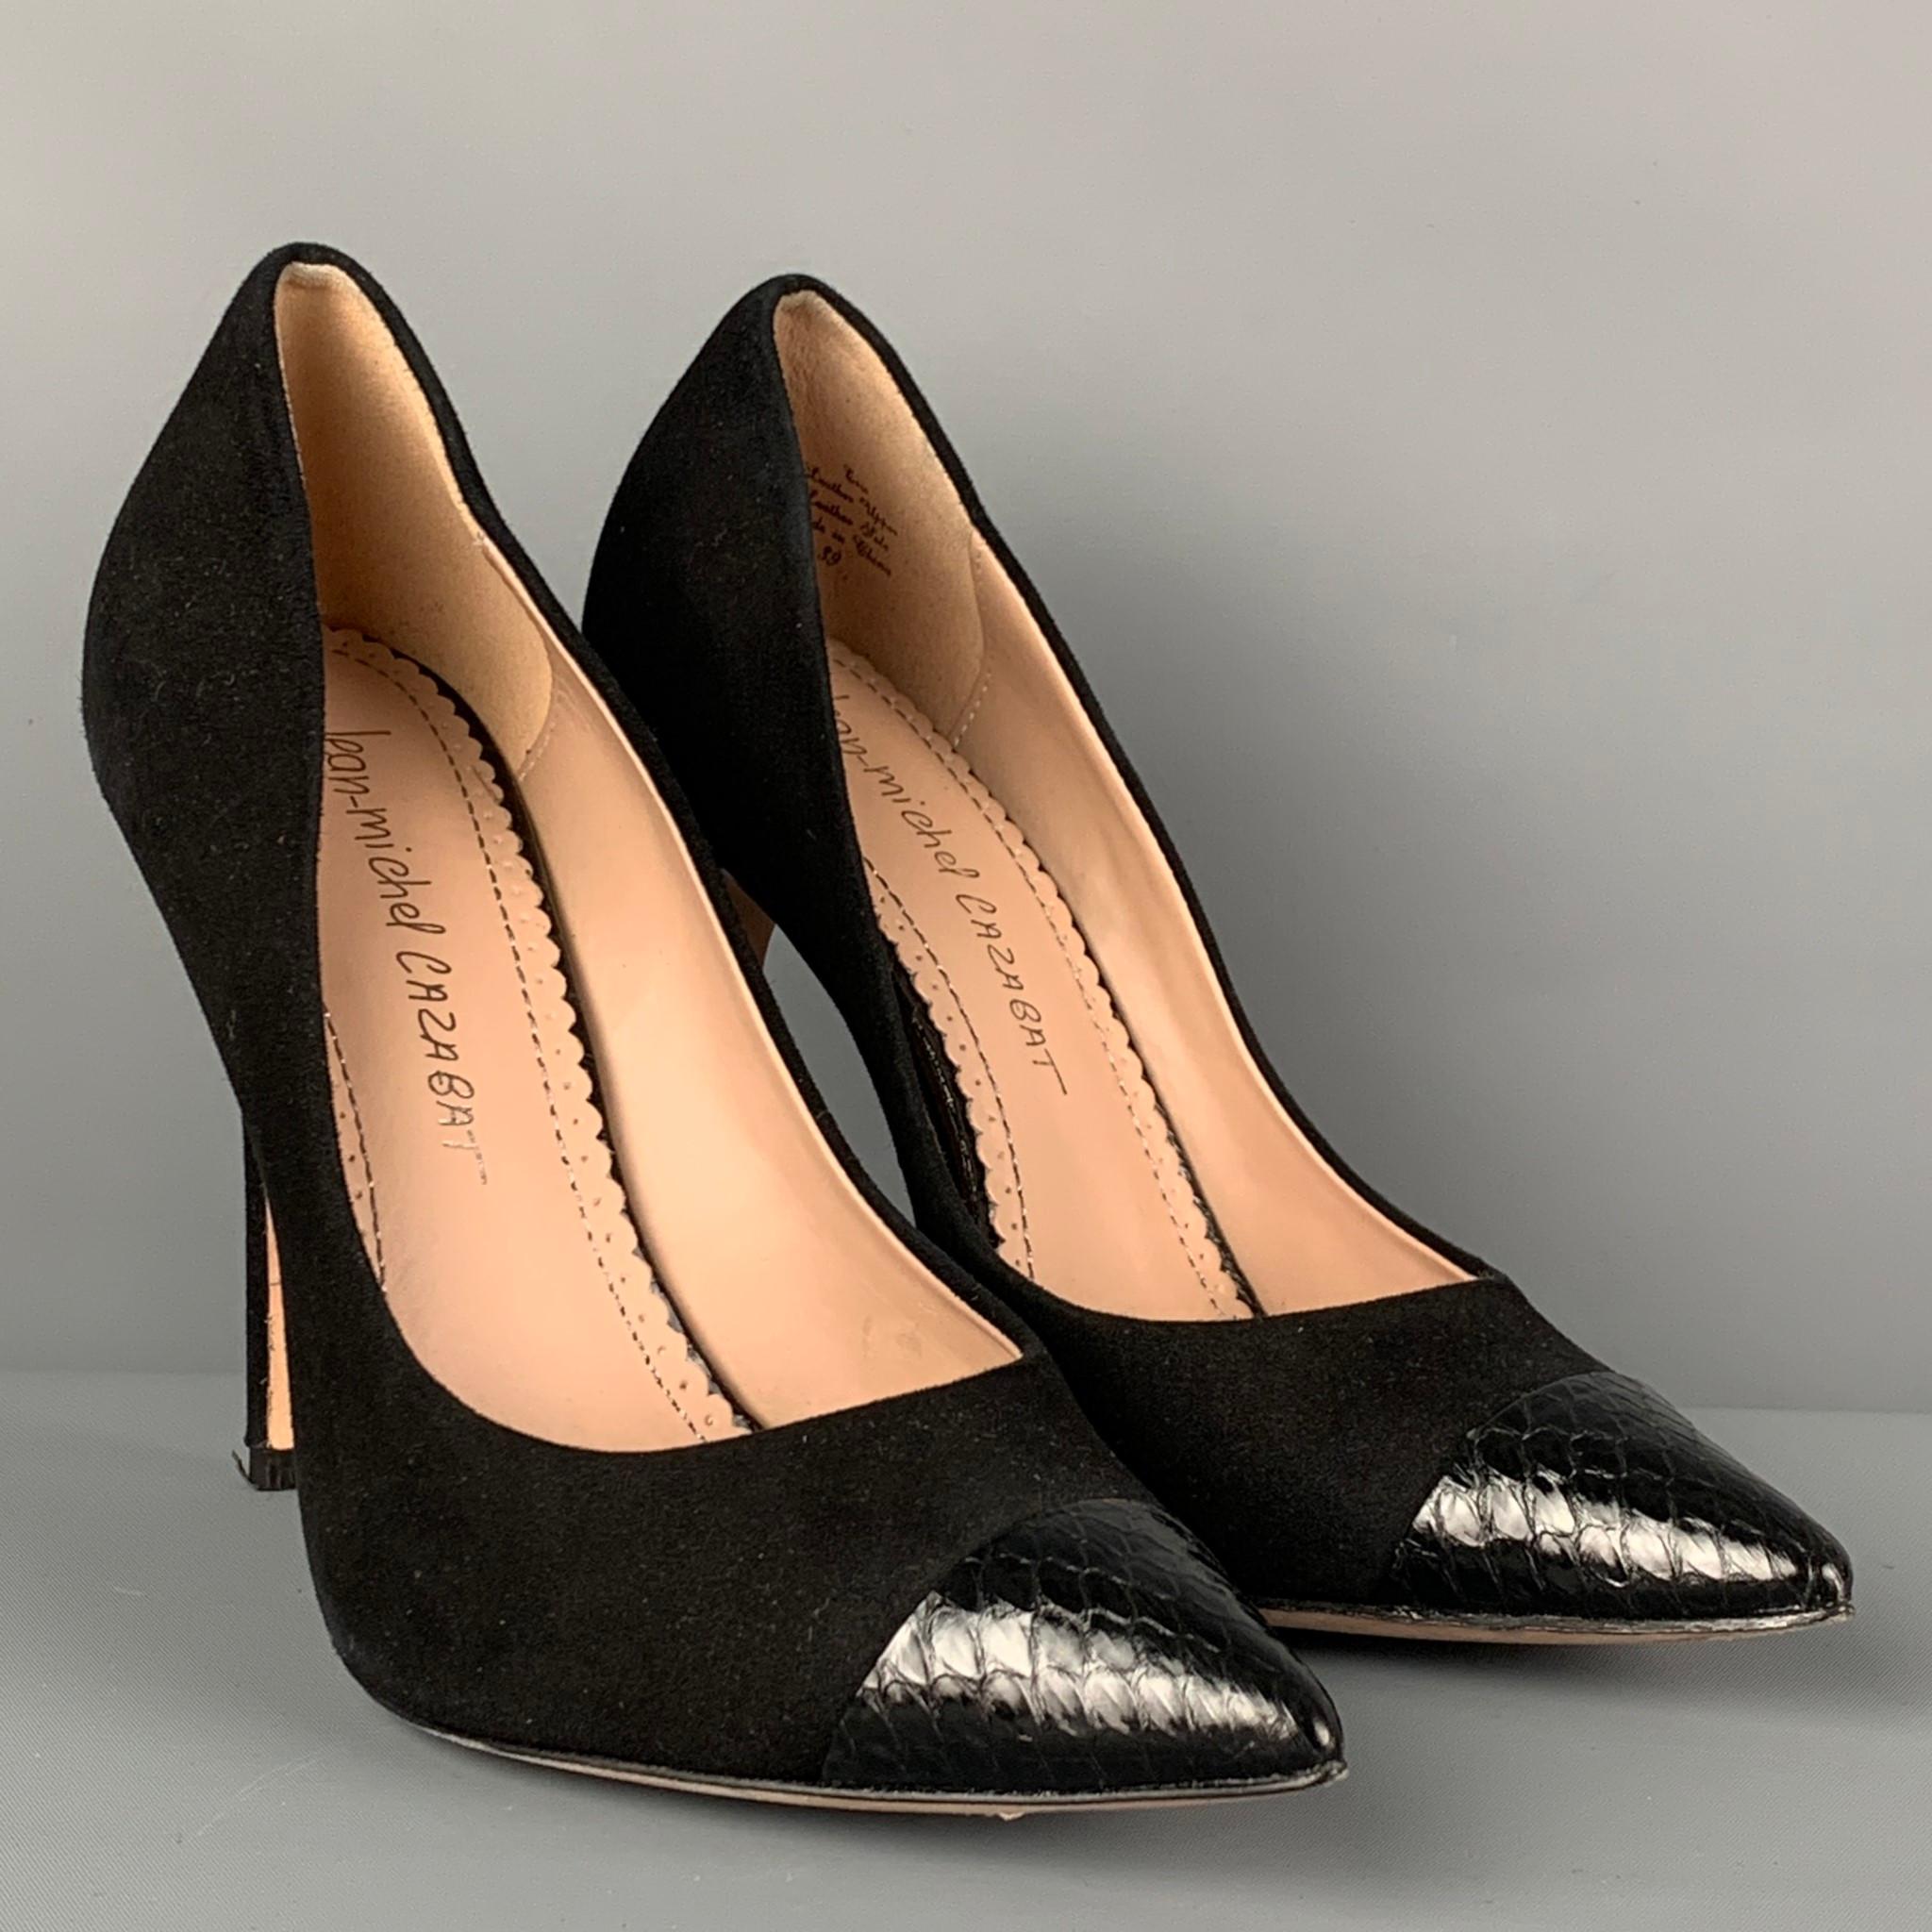 JEAN-MICHEL CAZABAT pumps comes in a black suede with a lizard trim featuring a pointed toe and a stiletto heel. Includes box.

Very Good Pre-Owned Condition.
Marked: 39

Measurements:

Heel: 4.5 in. 